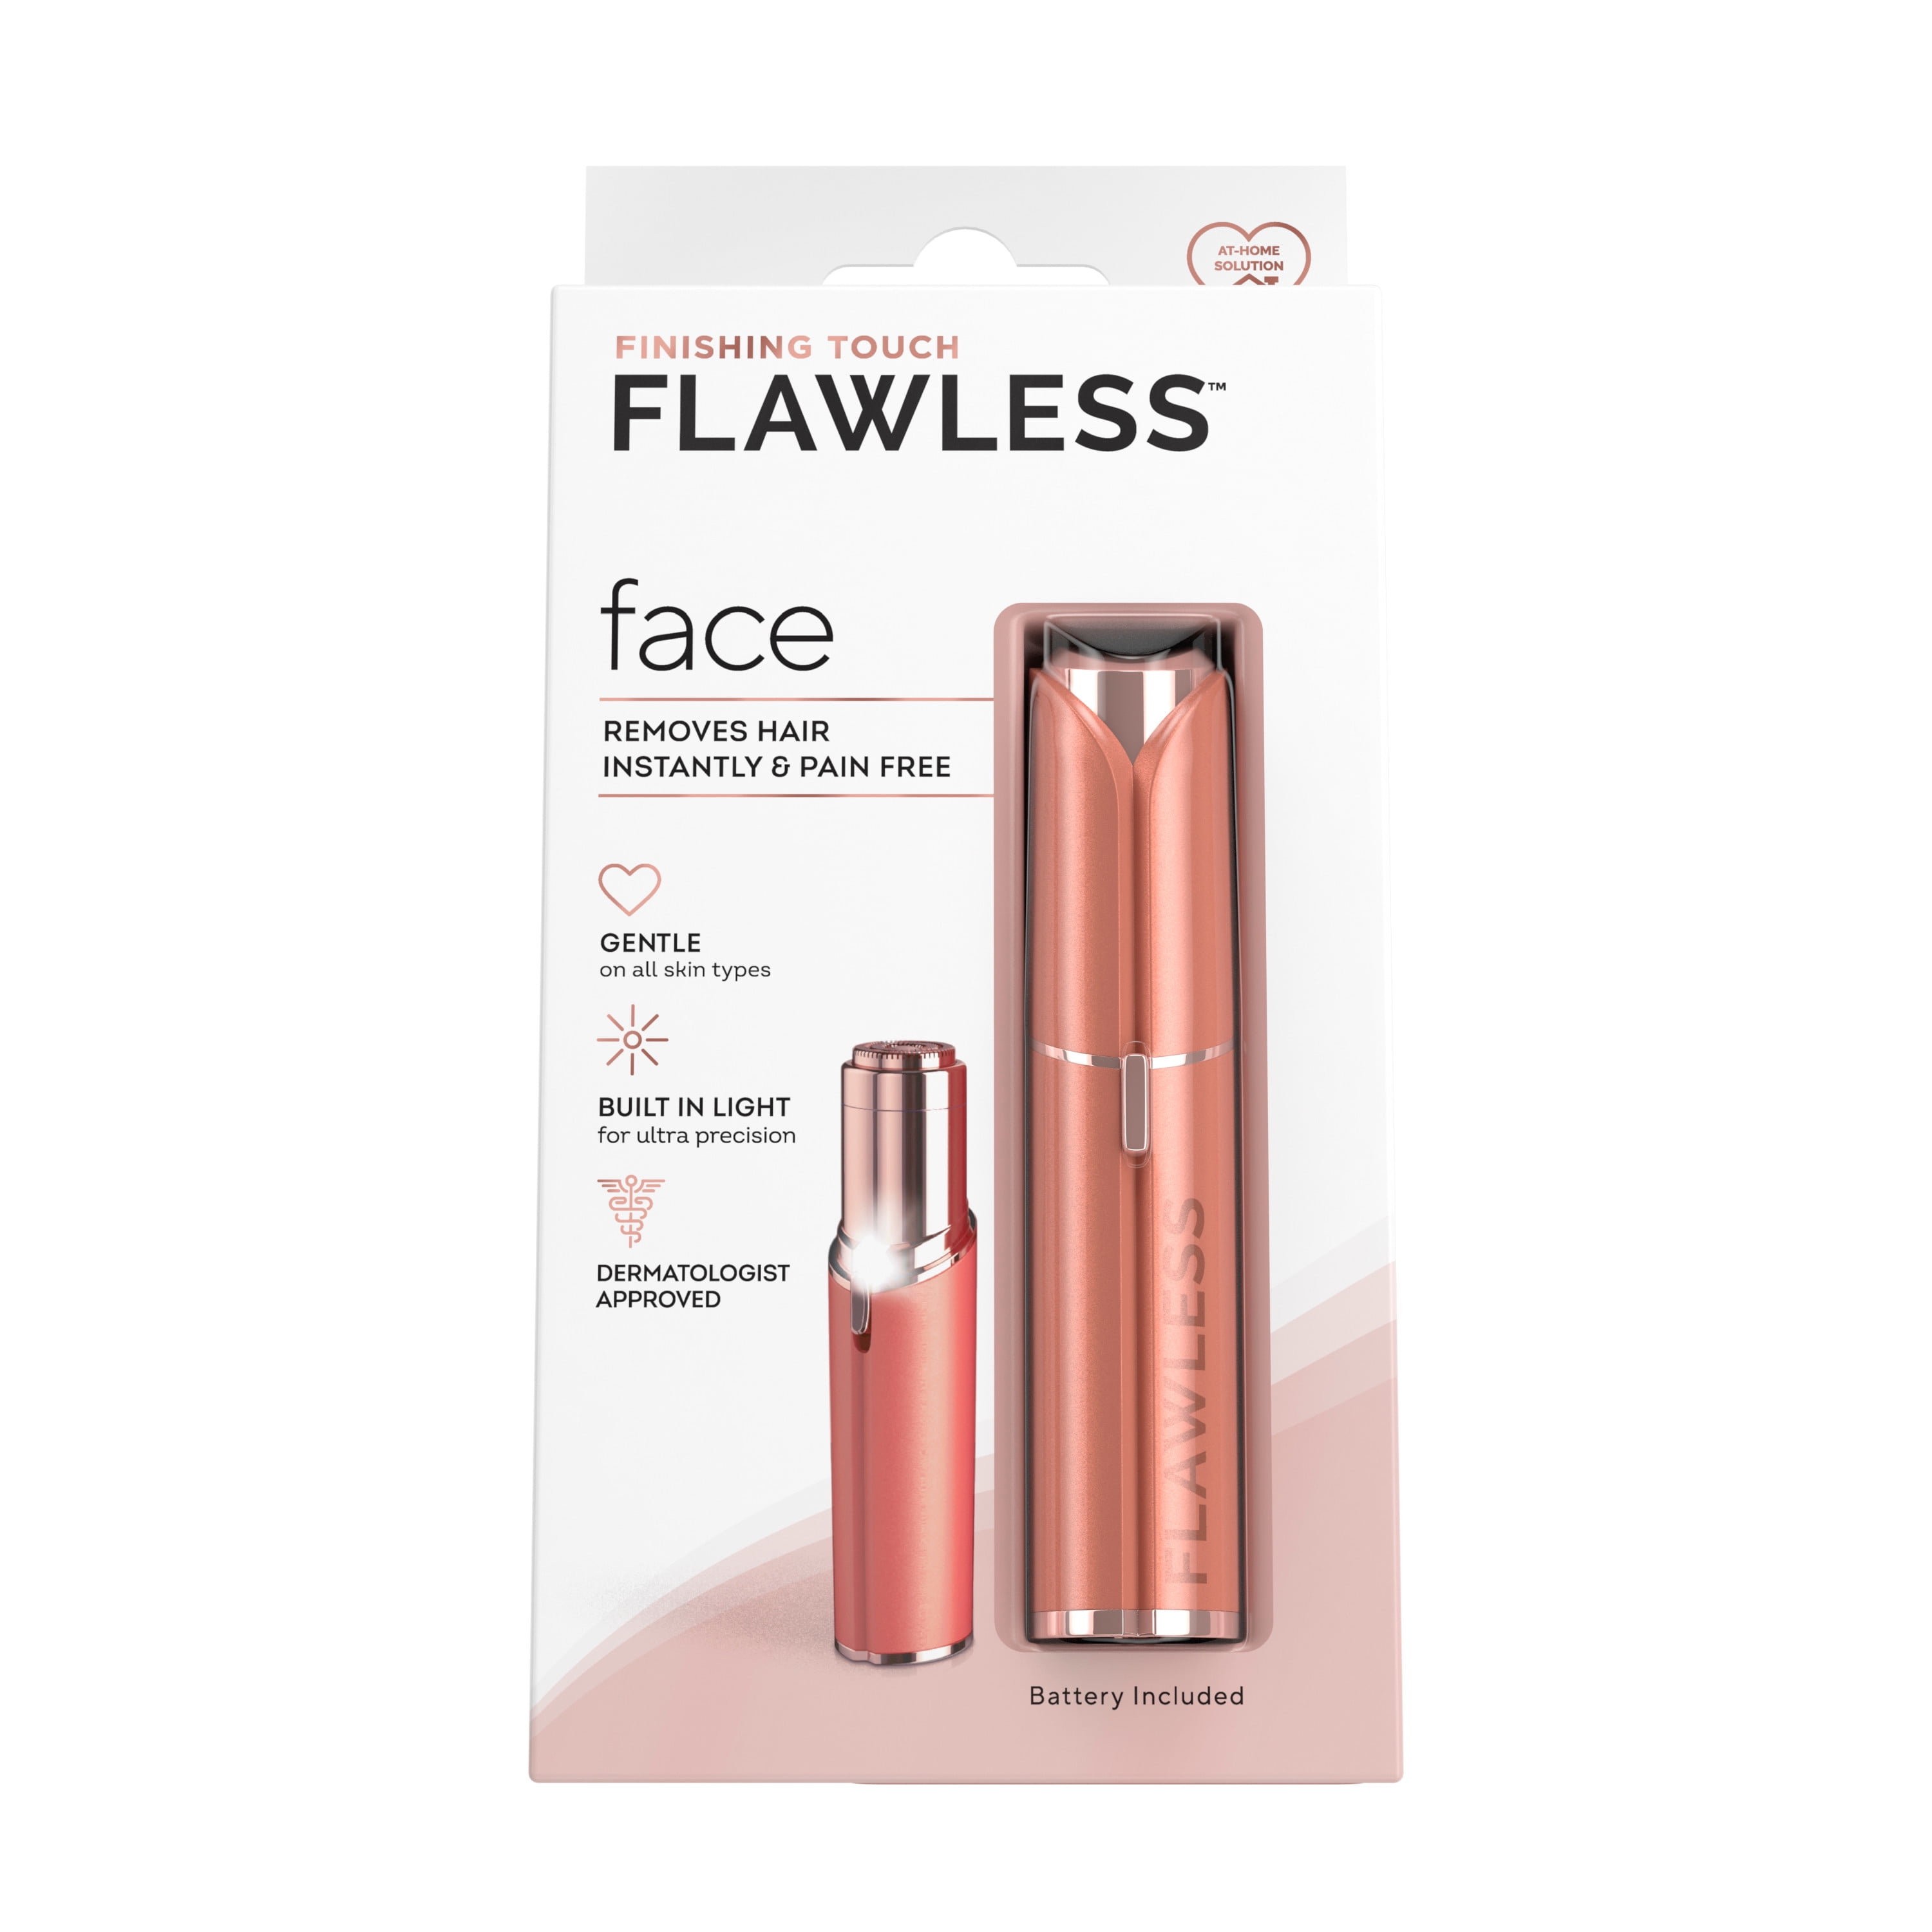 Jml flawless facial hair remover brand new | in Hamilton, Leicestershire |  Gumtree